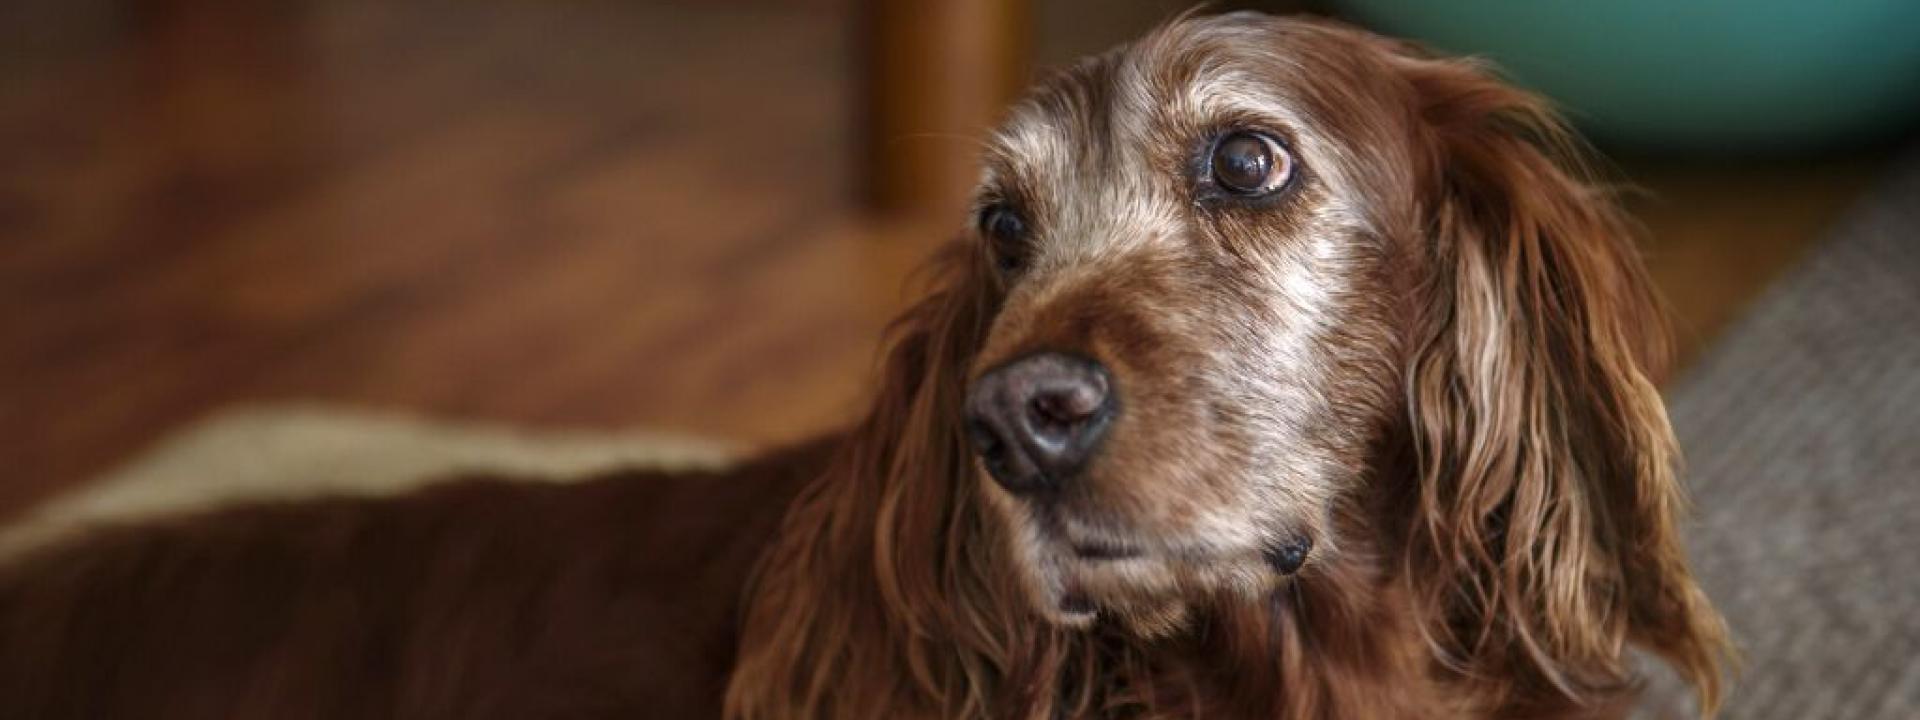 Portrait of an old Irish setter dog with white hair around its face and red hair on its body